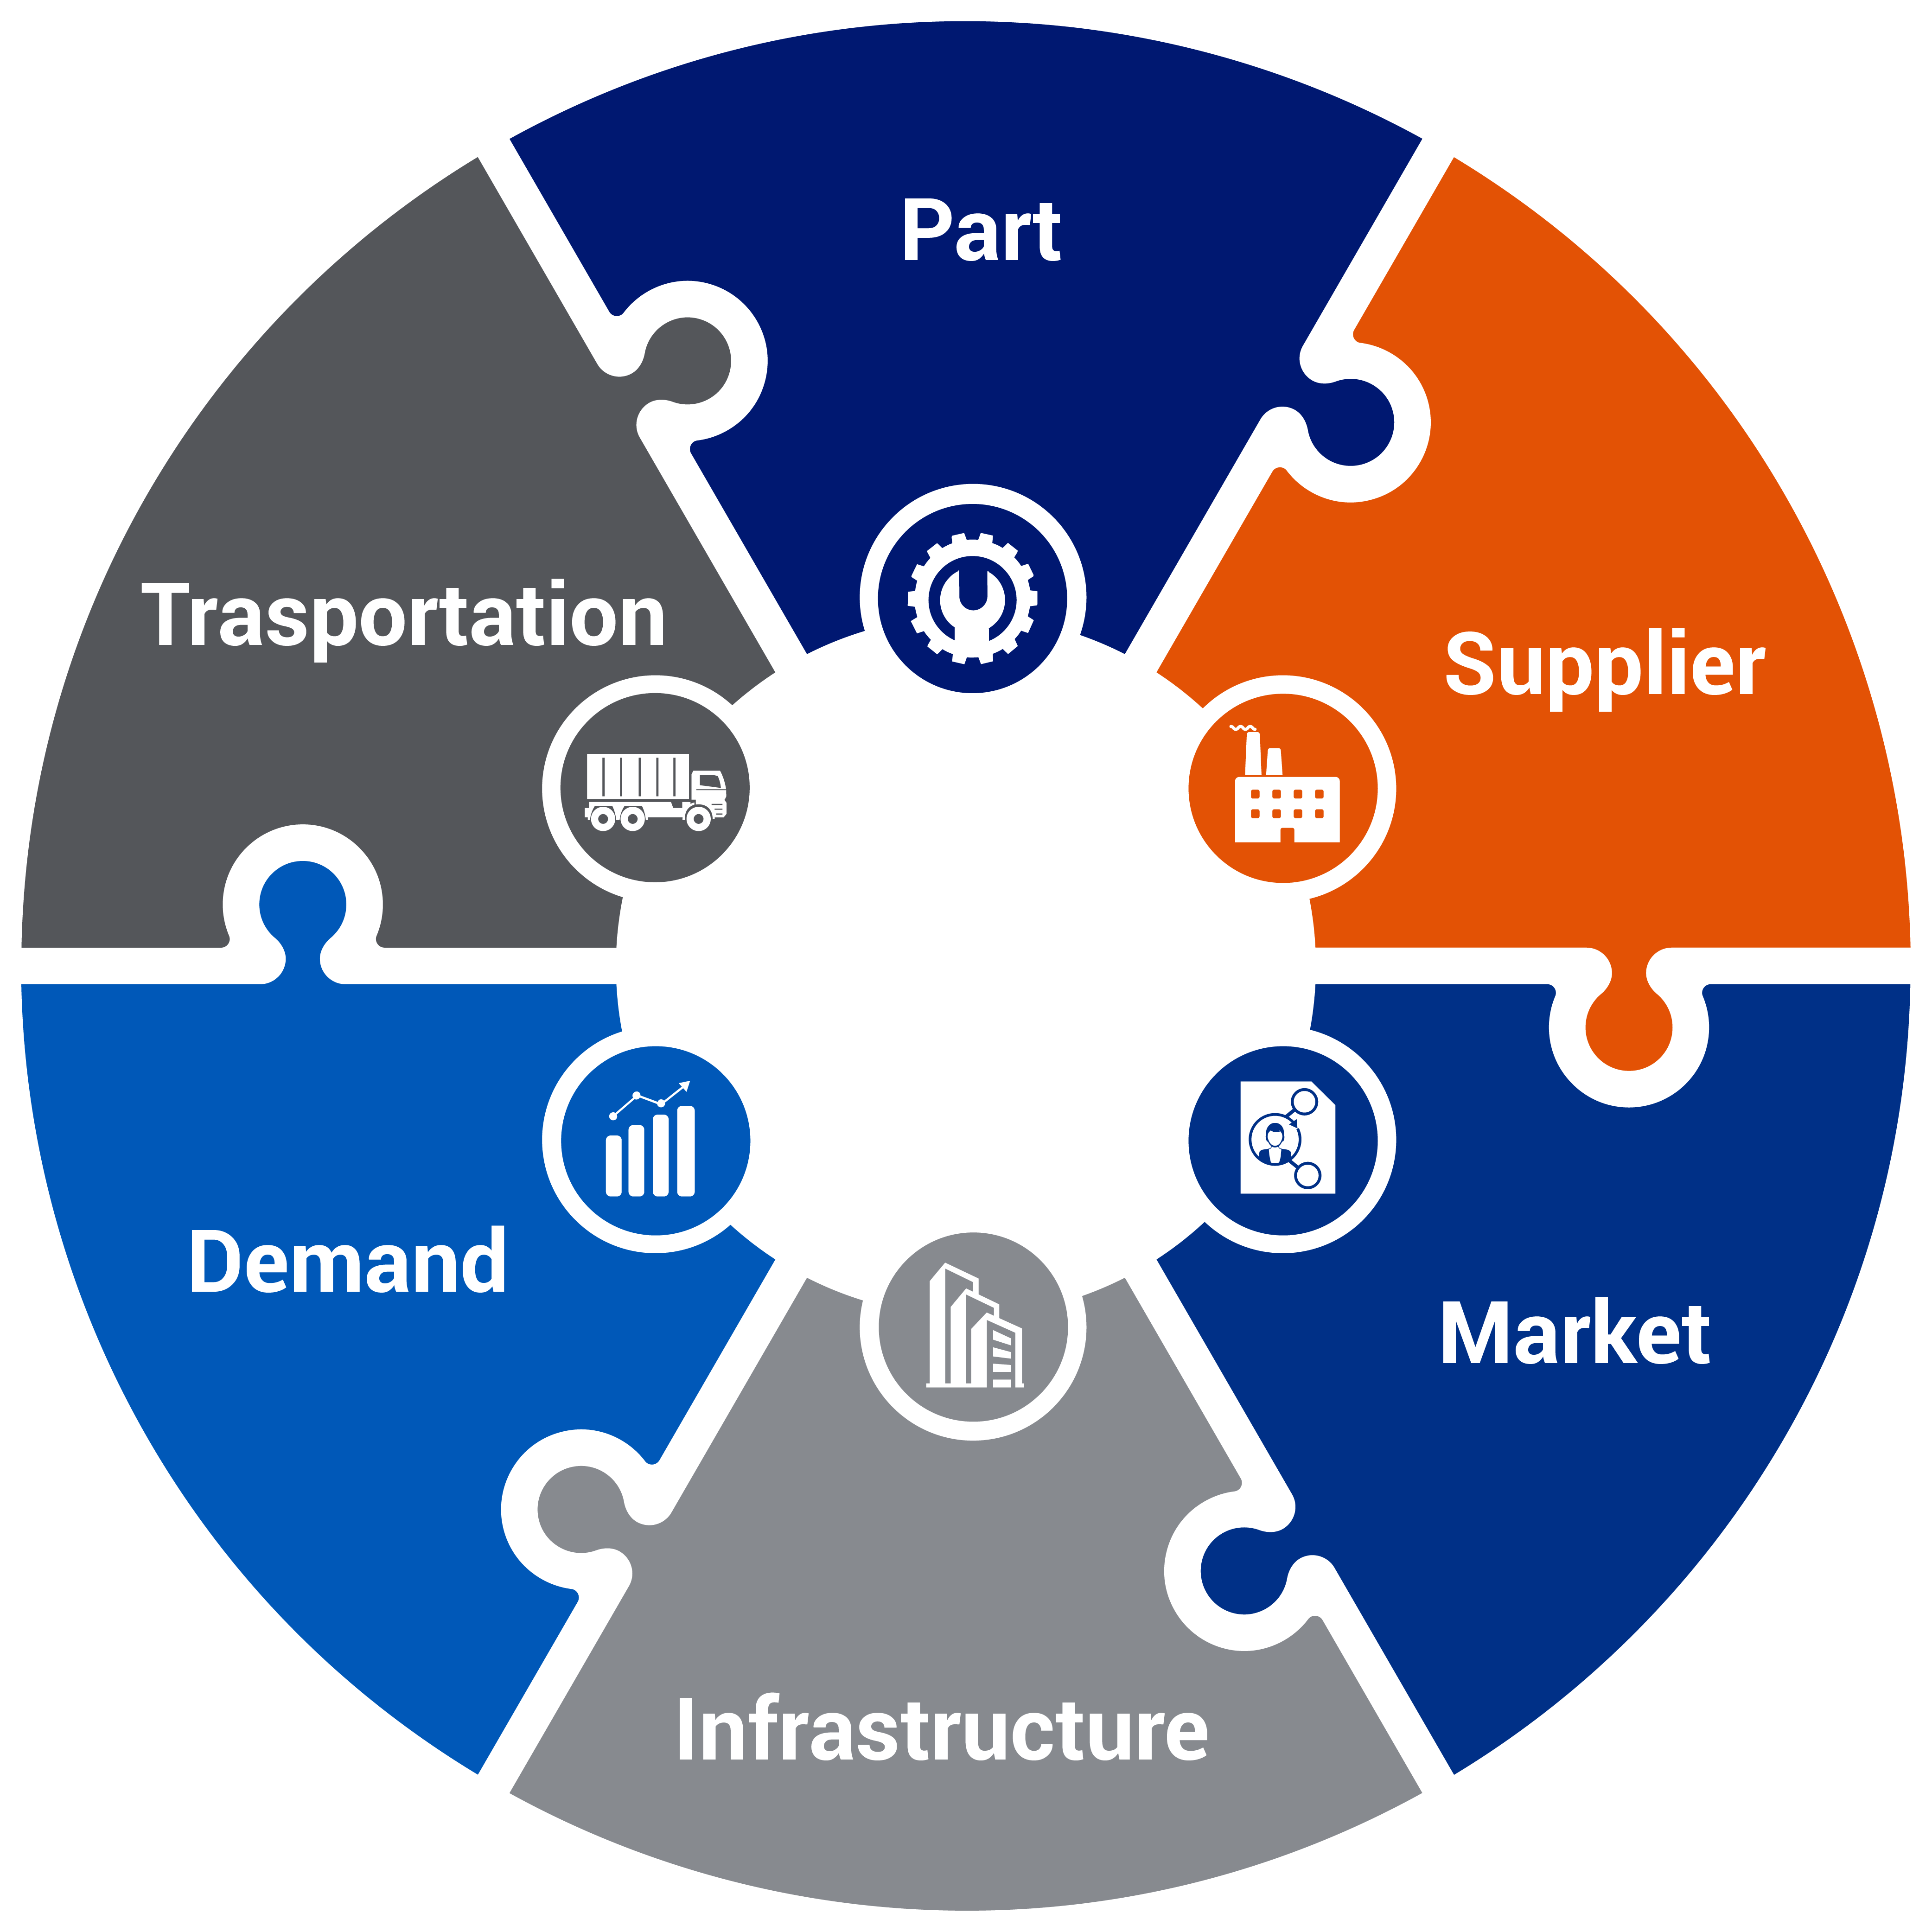 Part, Supplier, Market, Infrastructure, Demand, and Transportation shown as connected pieces of a puzzle.